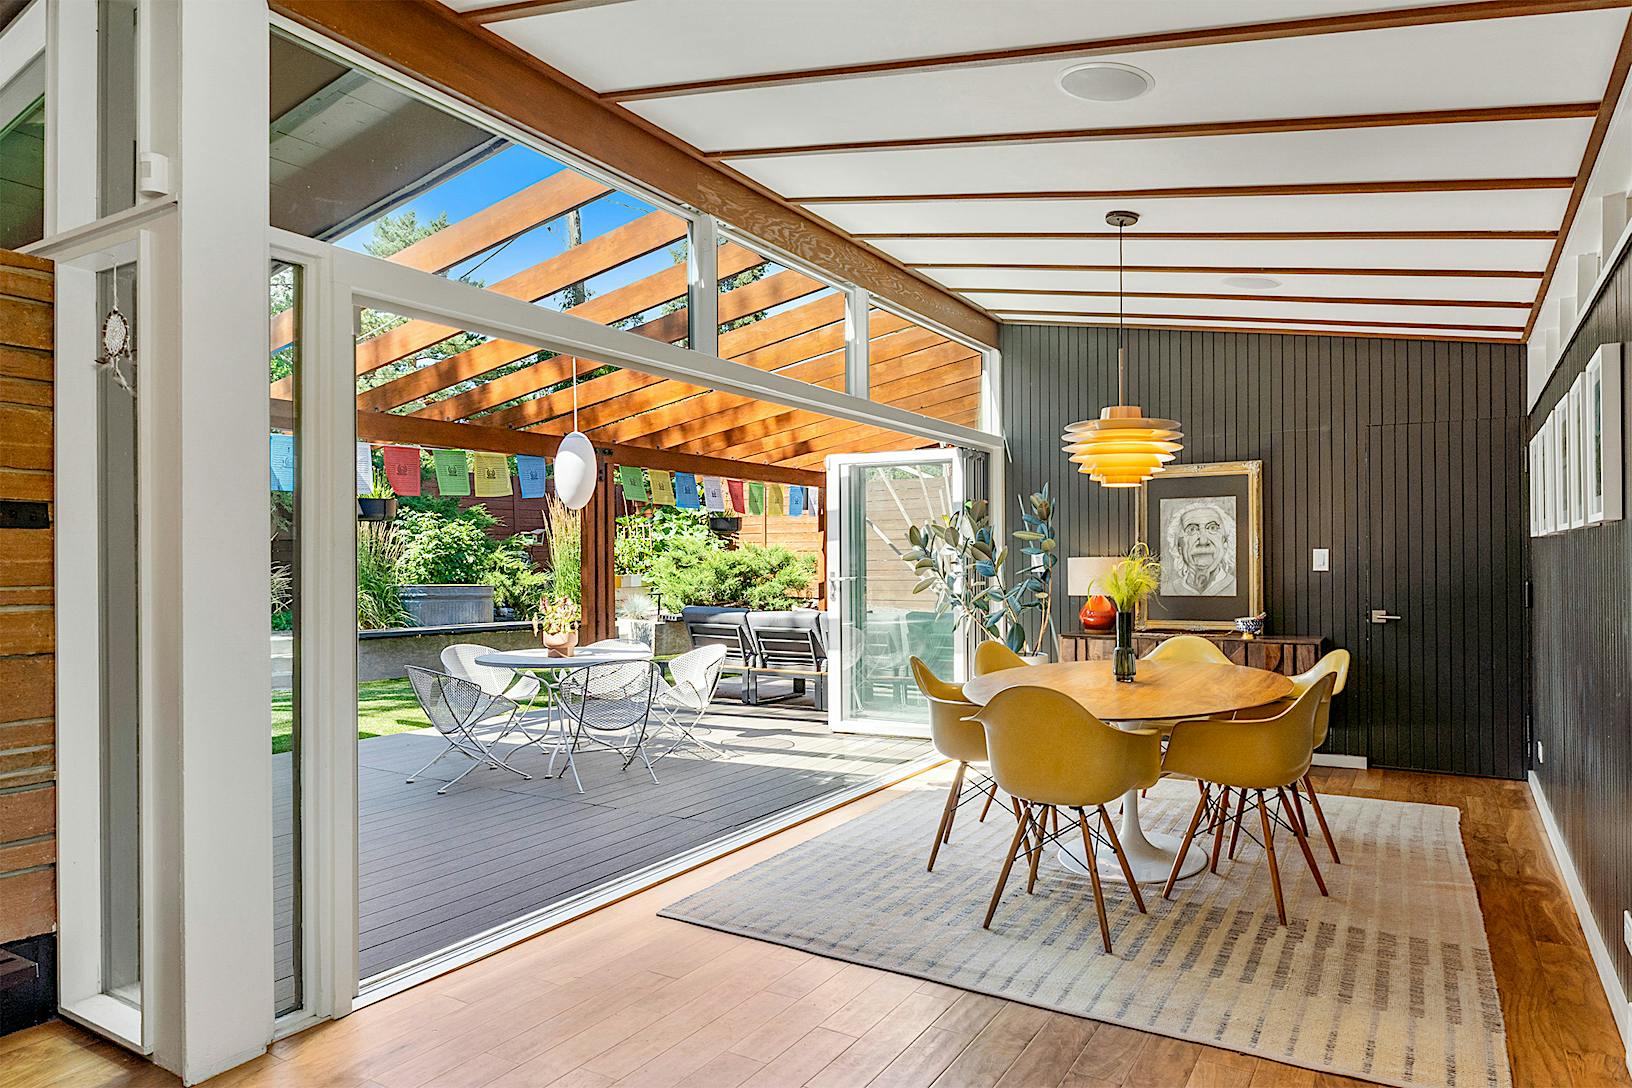 A modern dining area with wooden ceiling beams and a table with yellow chairs opens to an outdoor patio with seating through folding glass doors. 